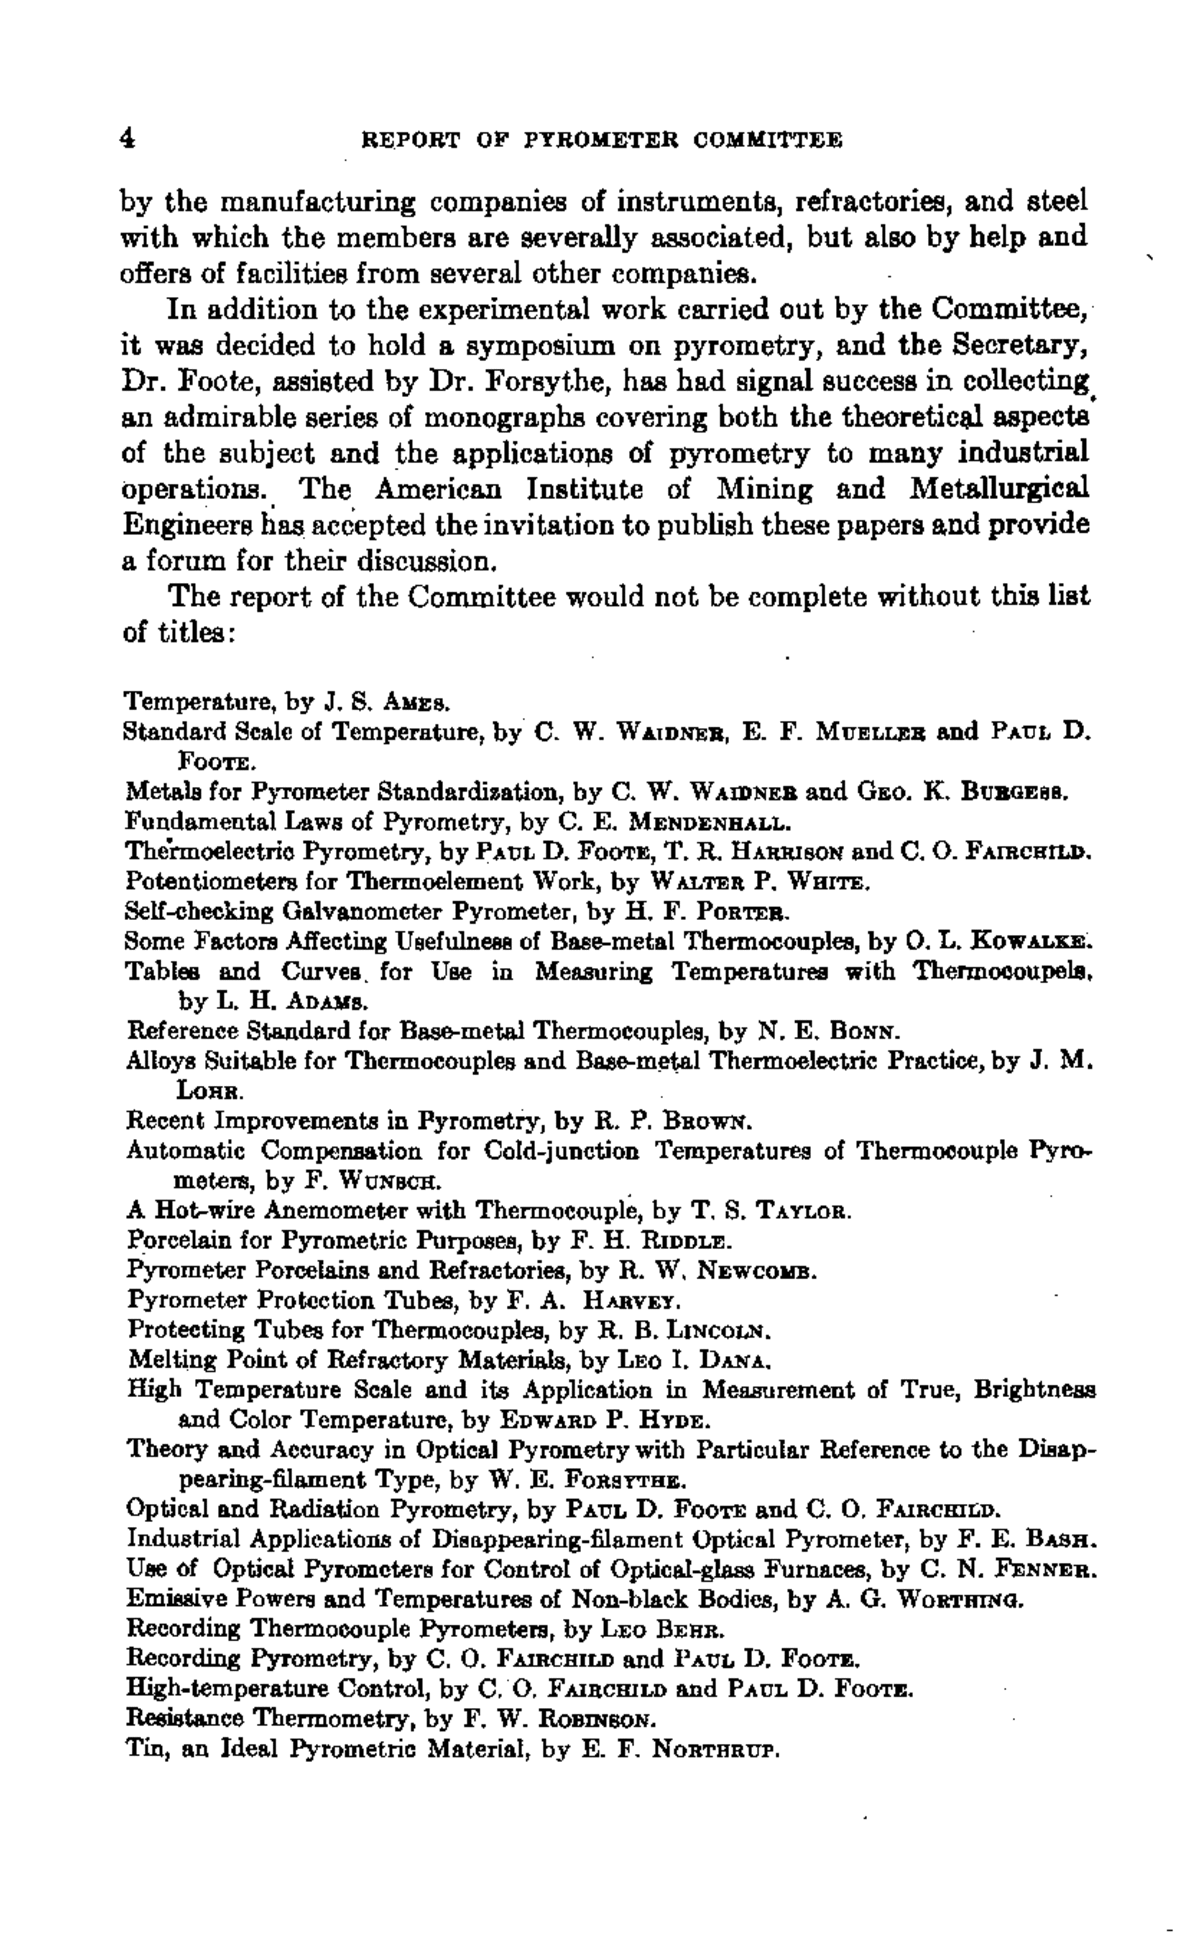 Optical and Radiation Pyrometry, Pyrometry: The Papers and Discussion of a  Symposium on Pyrometry Held by the American Institute of Mining and  Metallurgical Engineers at Its Chicago Meeting, September, 1919